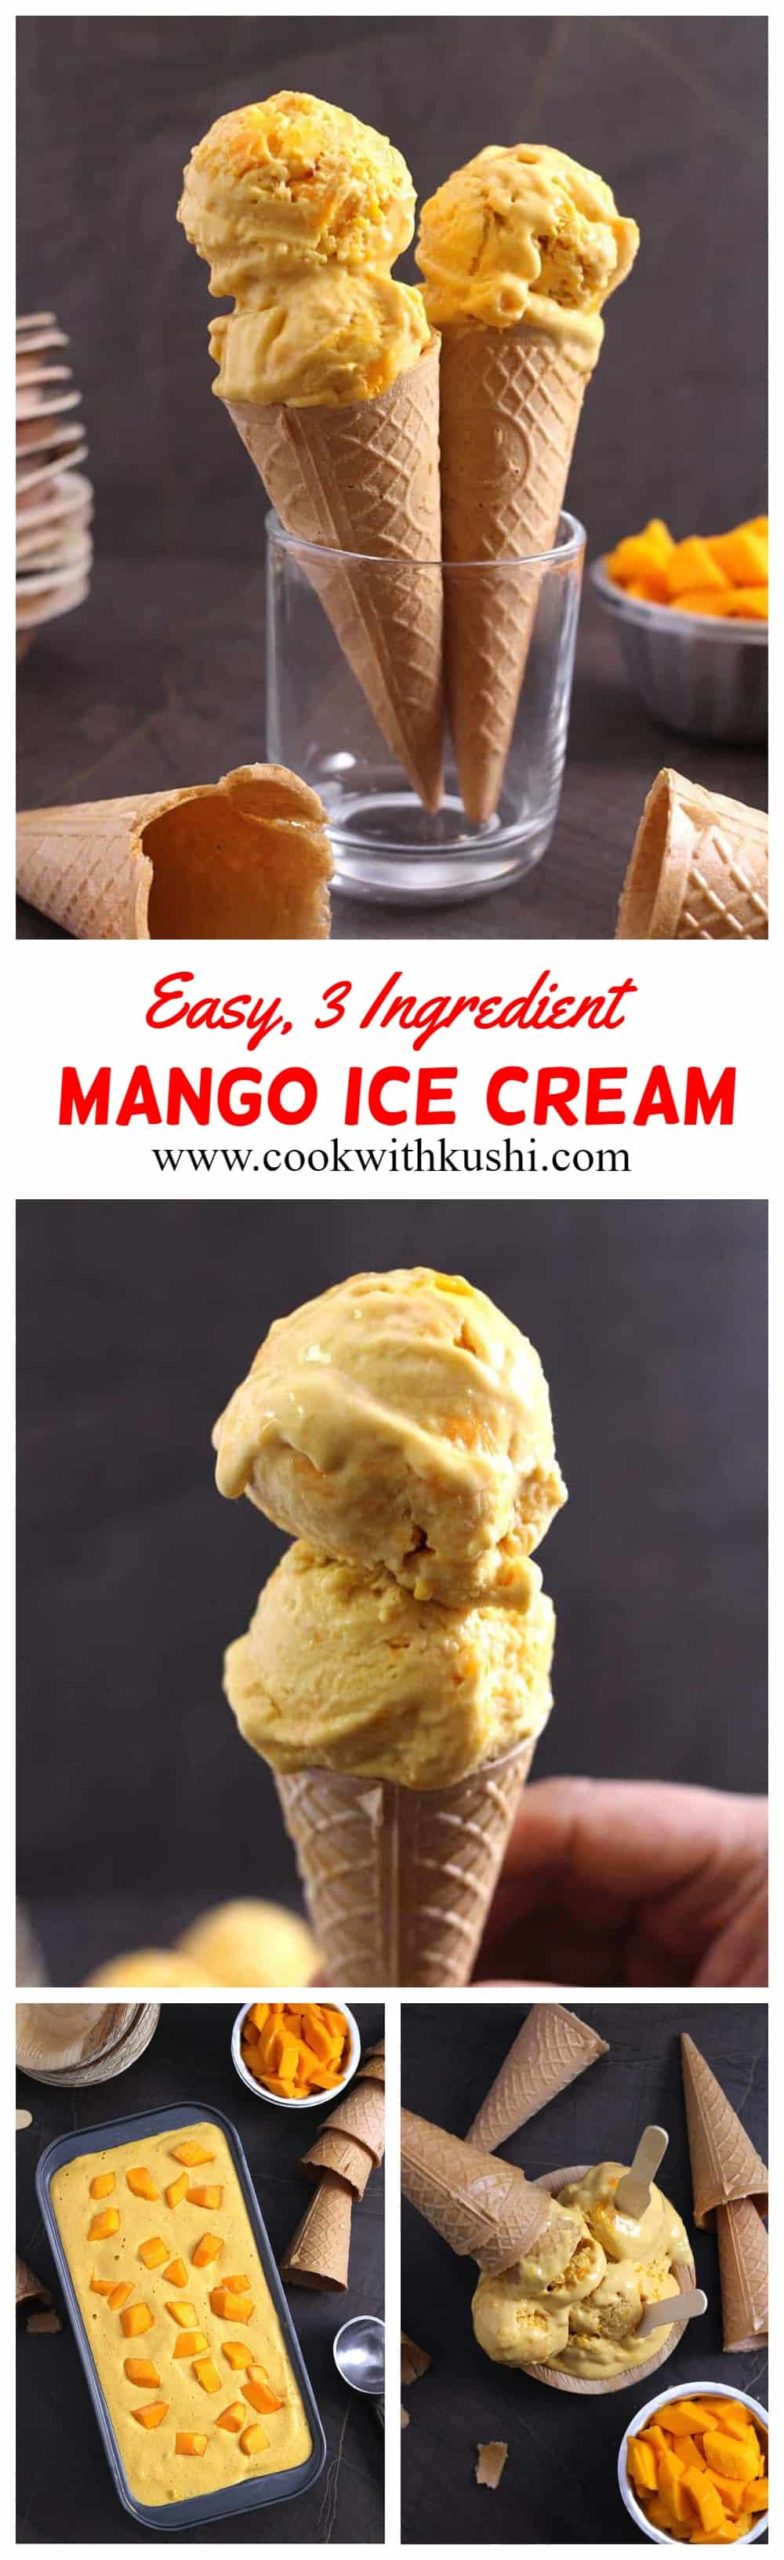 This Homemade Mango Ice Cream recipe is not only simple and easy to make, but its also creamy with full of flavor from the fresh mangoes. You don't need any ice cream maker to prepare this recipe. One of the best summer recipe to try to beat the heat when mangoes are in season. #icecream #homemade #Nochurn #eggless #vegan #haagendazs #mochi #smoothie #sorbet